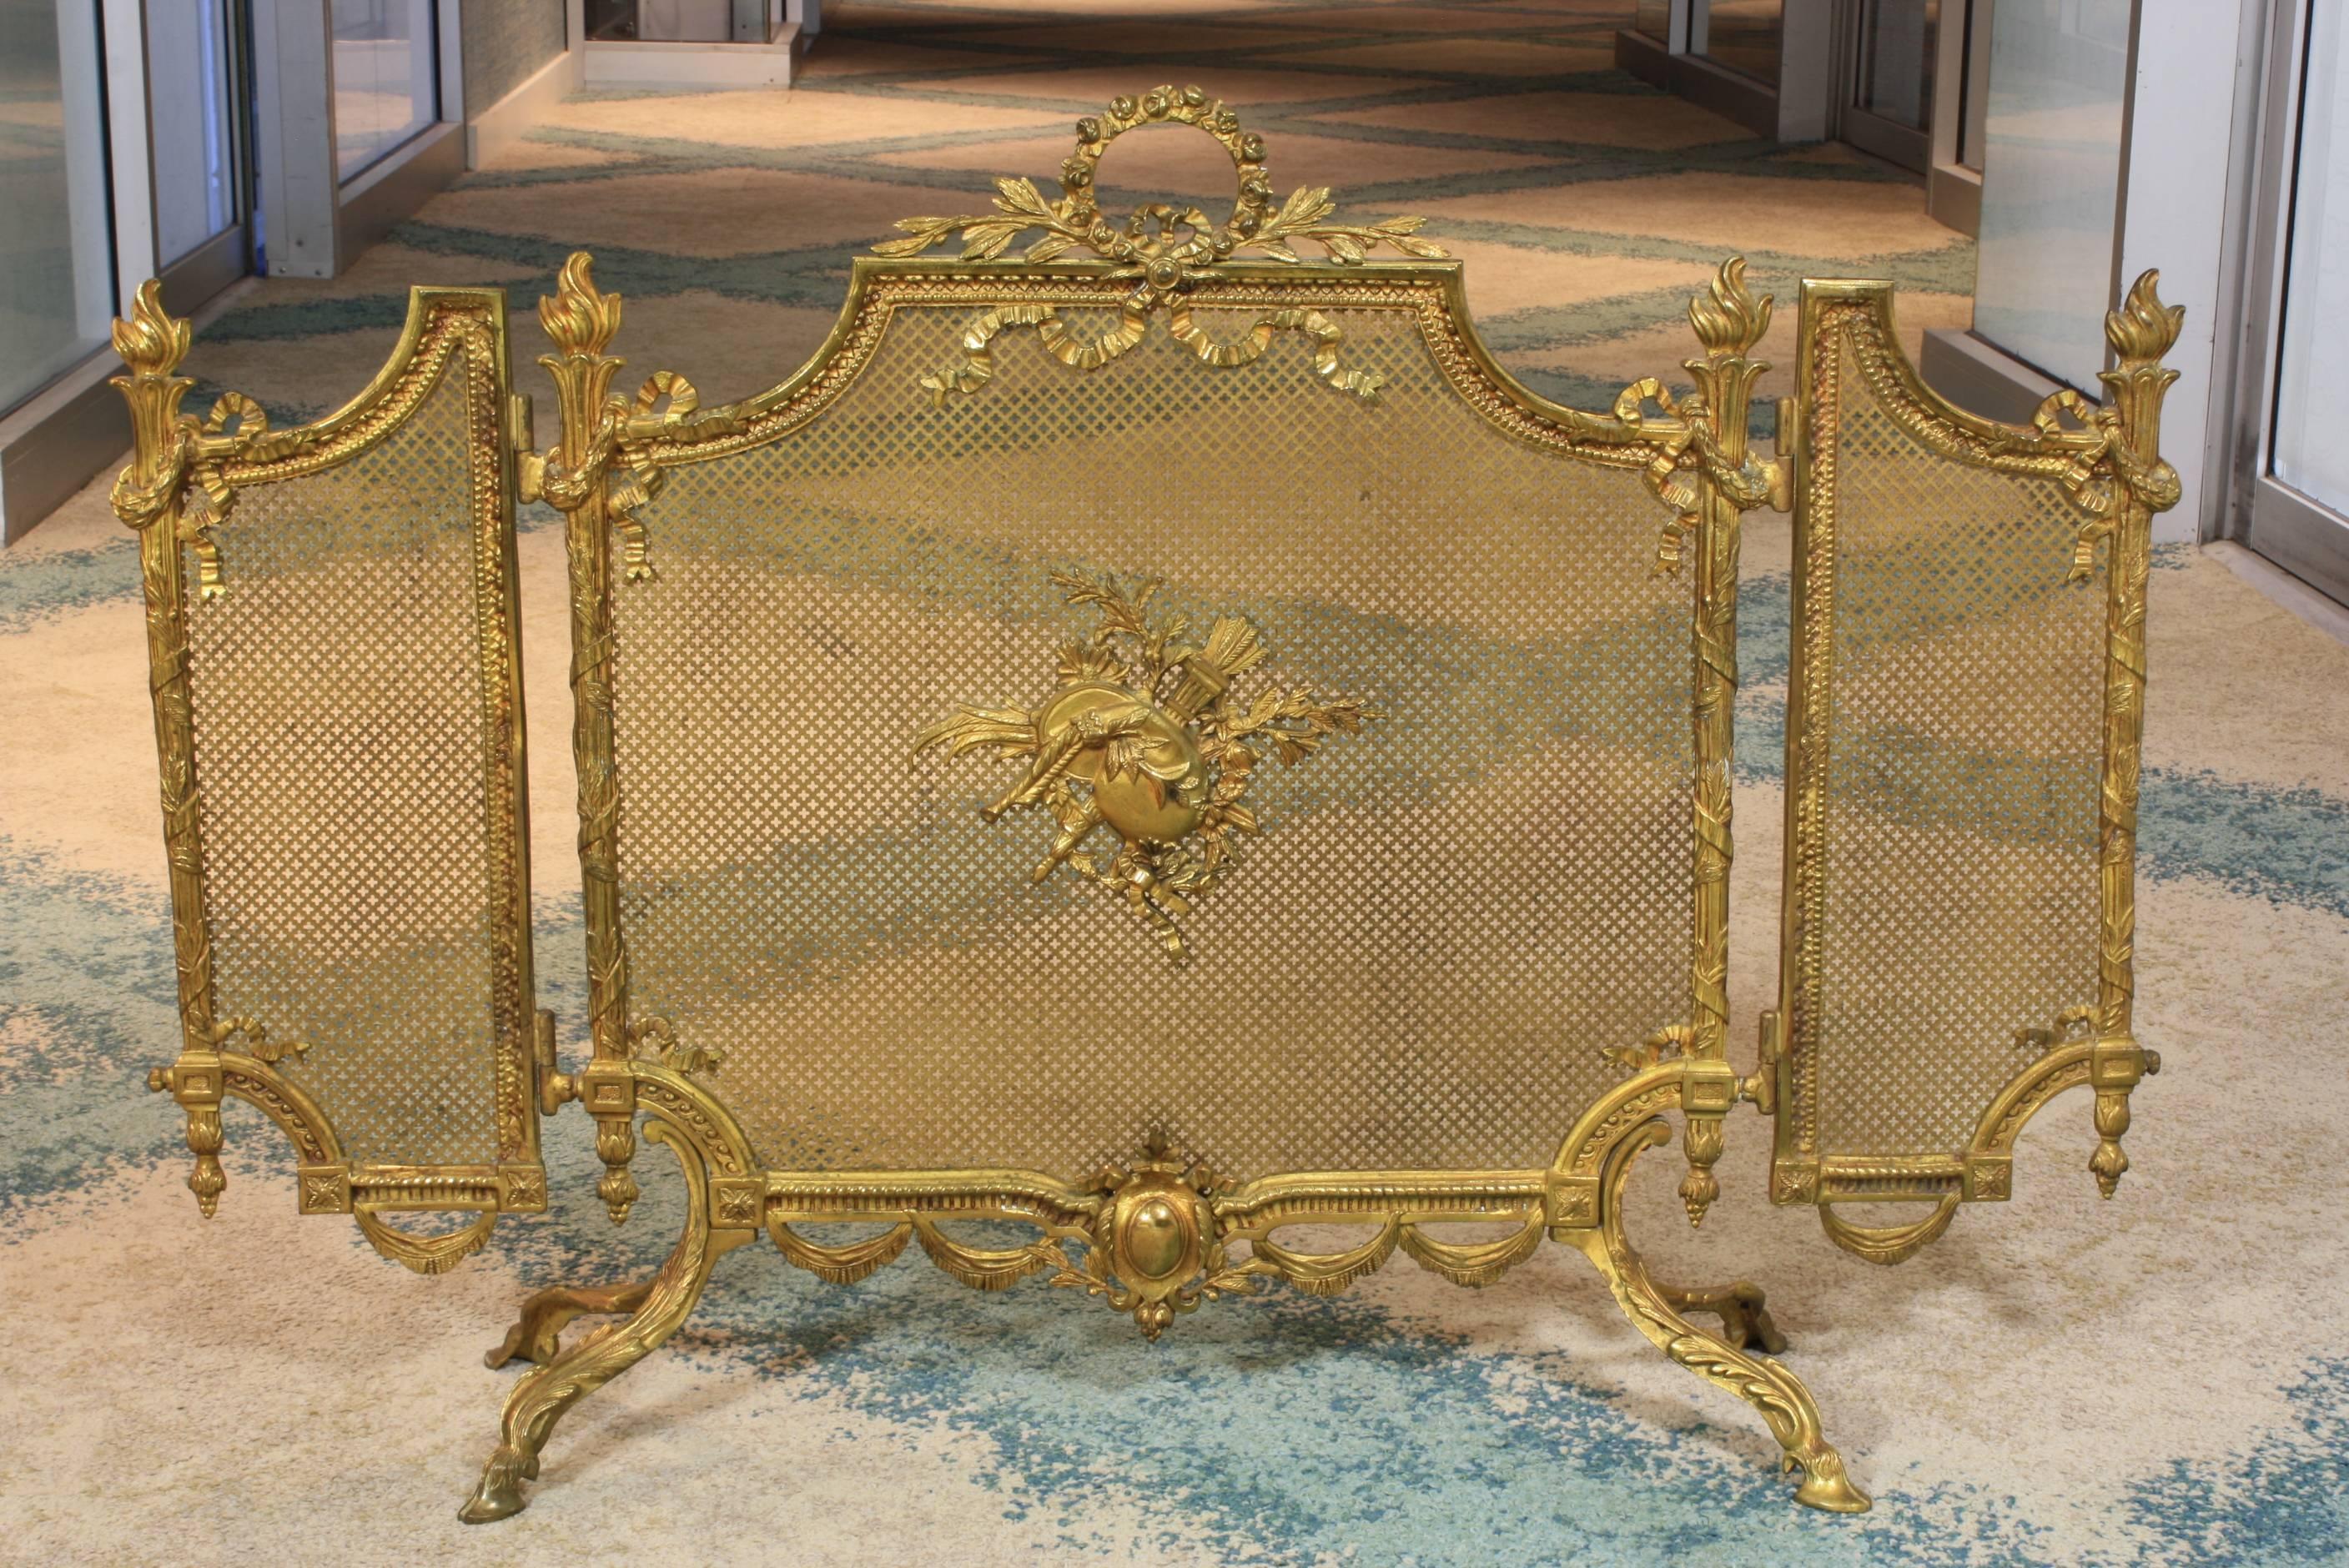 French Louis XVI style gilt bronze fire screen with side panels (19th century). The side panels can swivel backwards to accommodate a range of chimney widths. The fire screen is decorated with typical Louis XVI ornamentation, including a floral